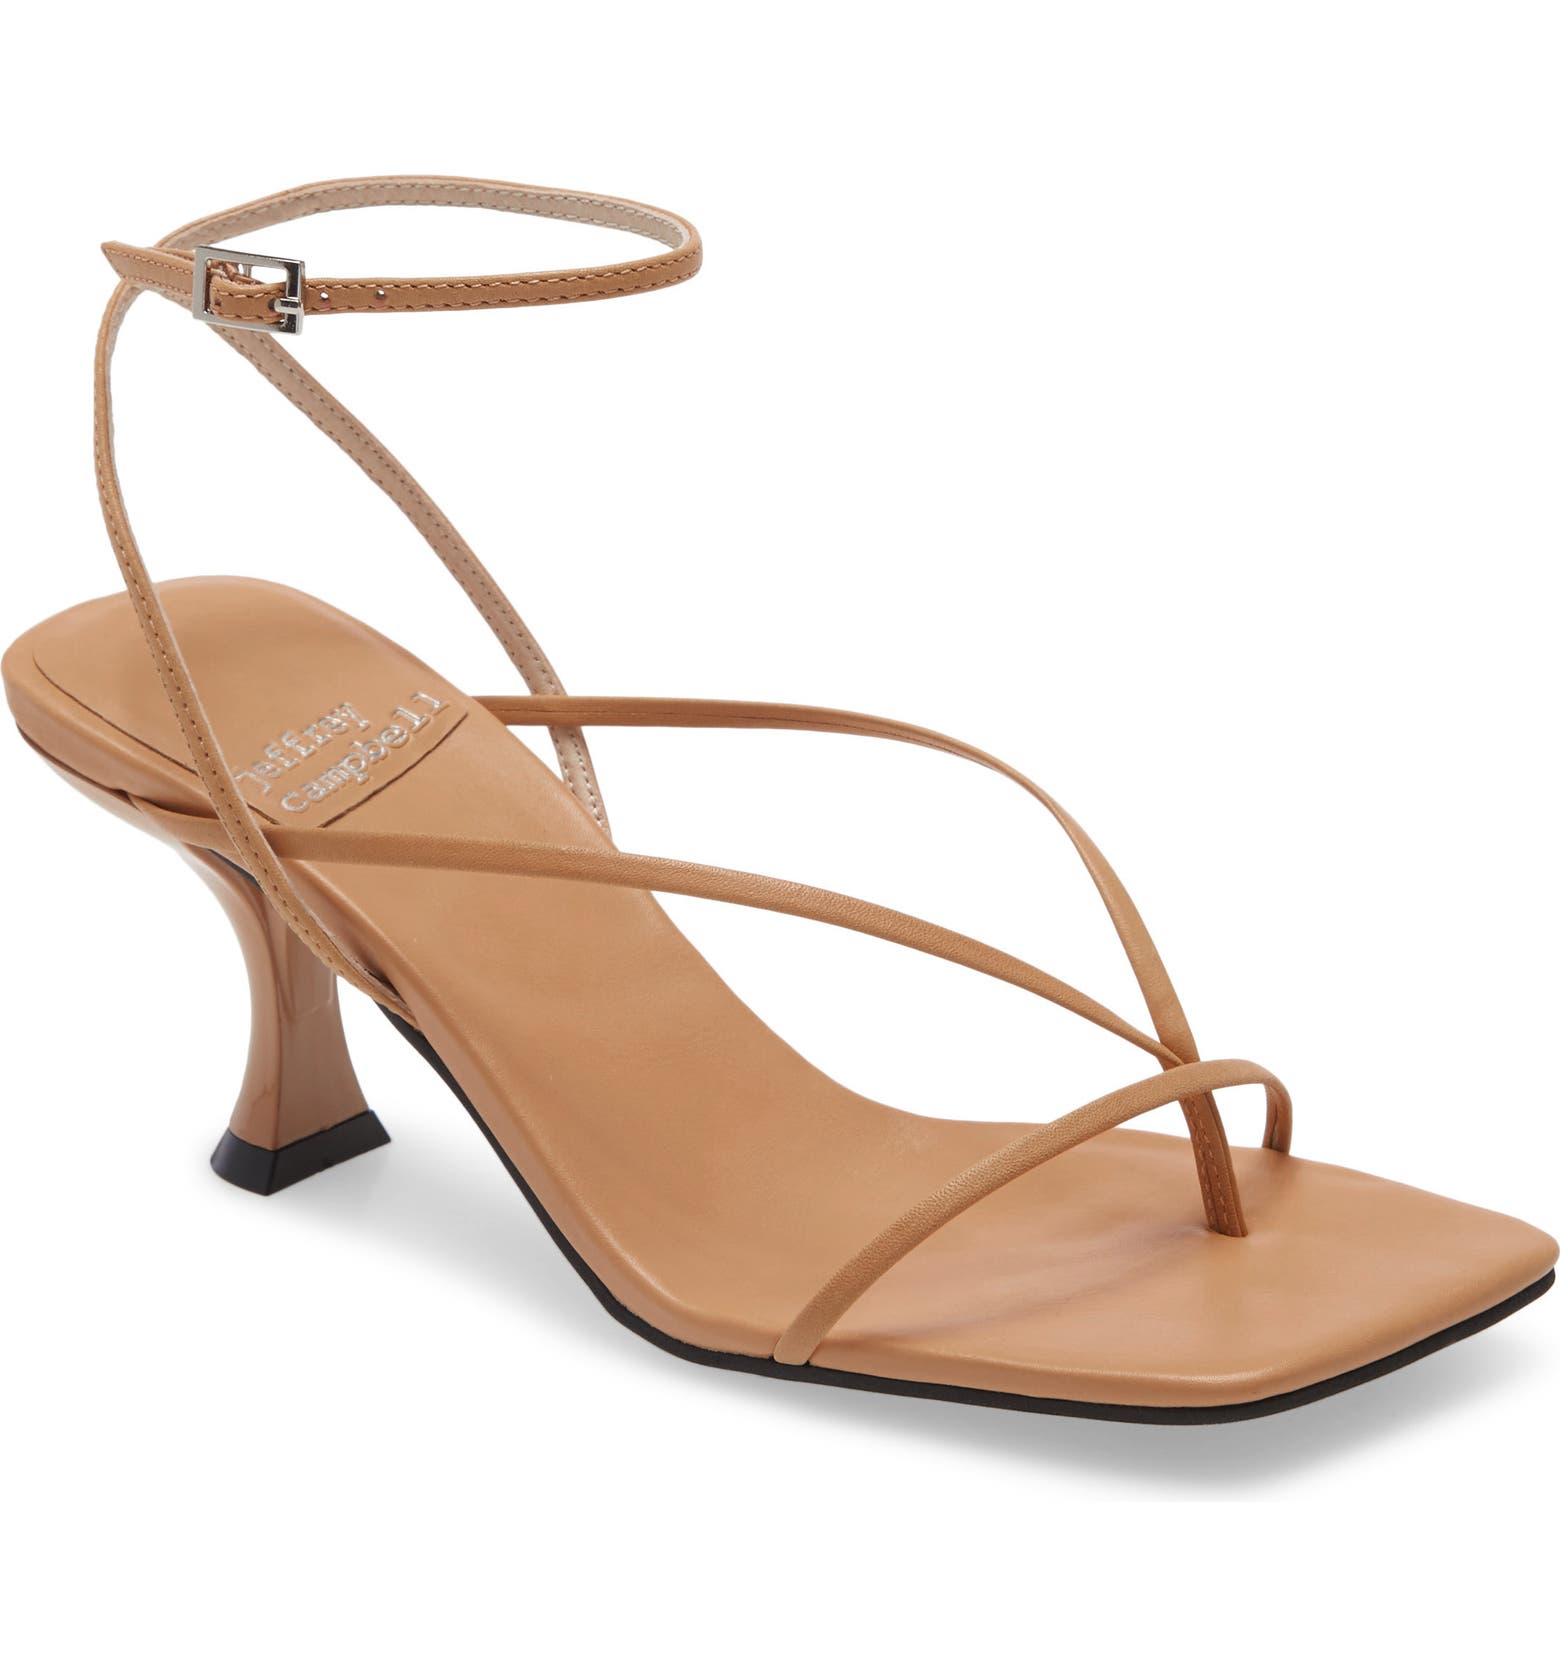 Beige straooy sandals